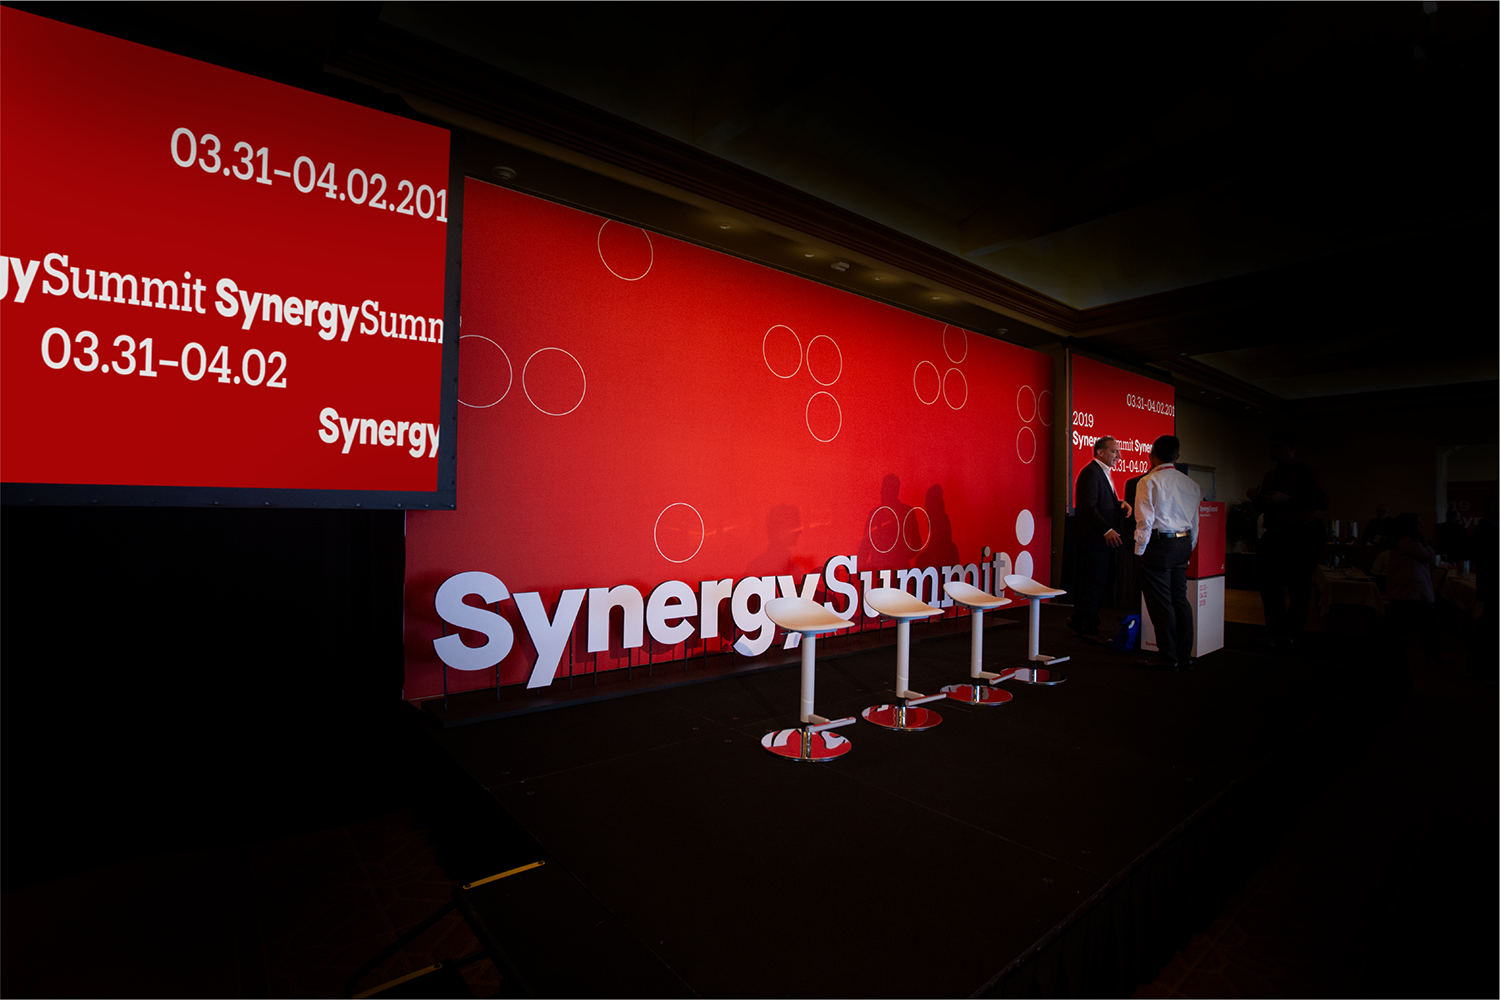 In 2016, in partnership with Synergy HCA, SRX founded the Synergy Summit. This exclusive, C-level event for the post-acute care (PAC) industry was created to provide our customers, partners, and industry leaders with a carefully curated event with the most relevant content in an intimate, luxurious setting.